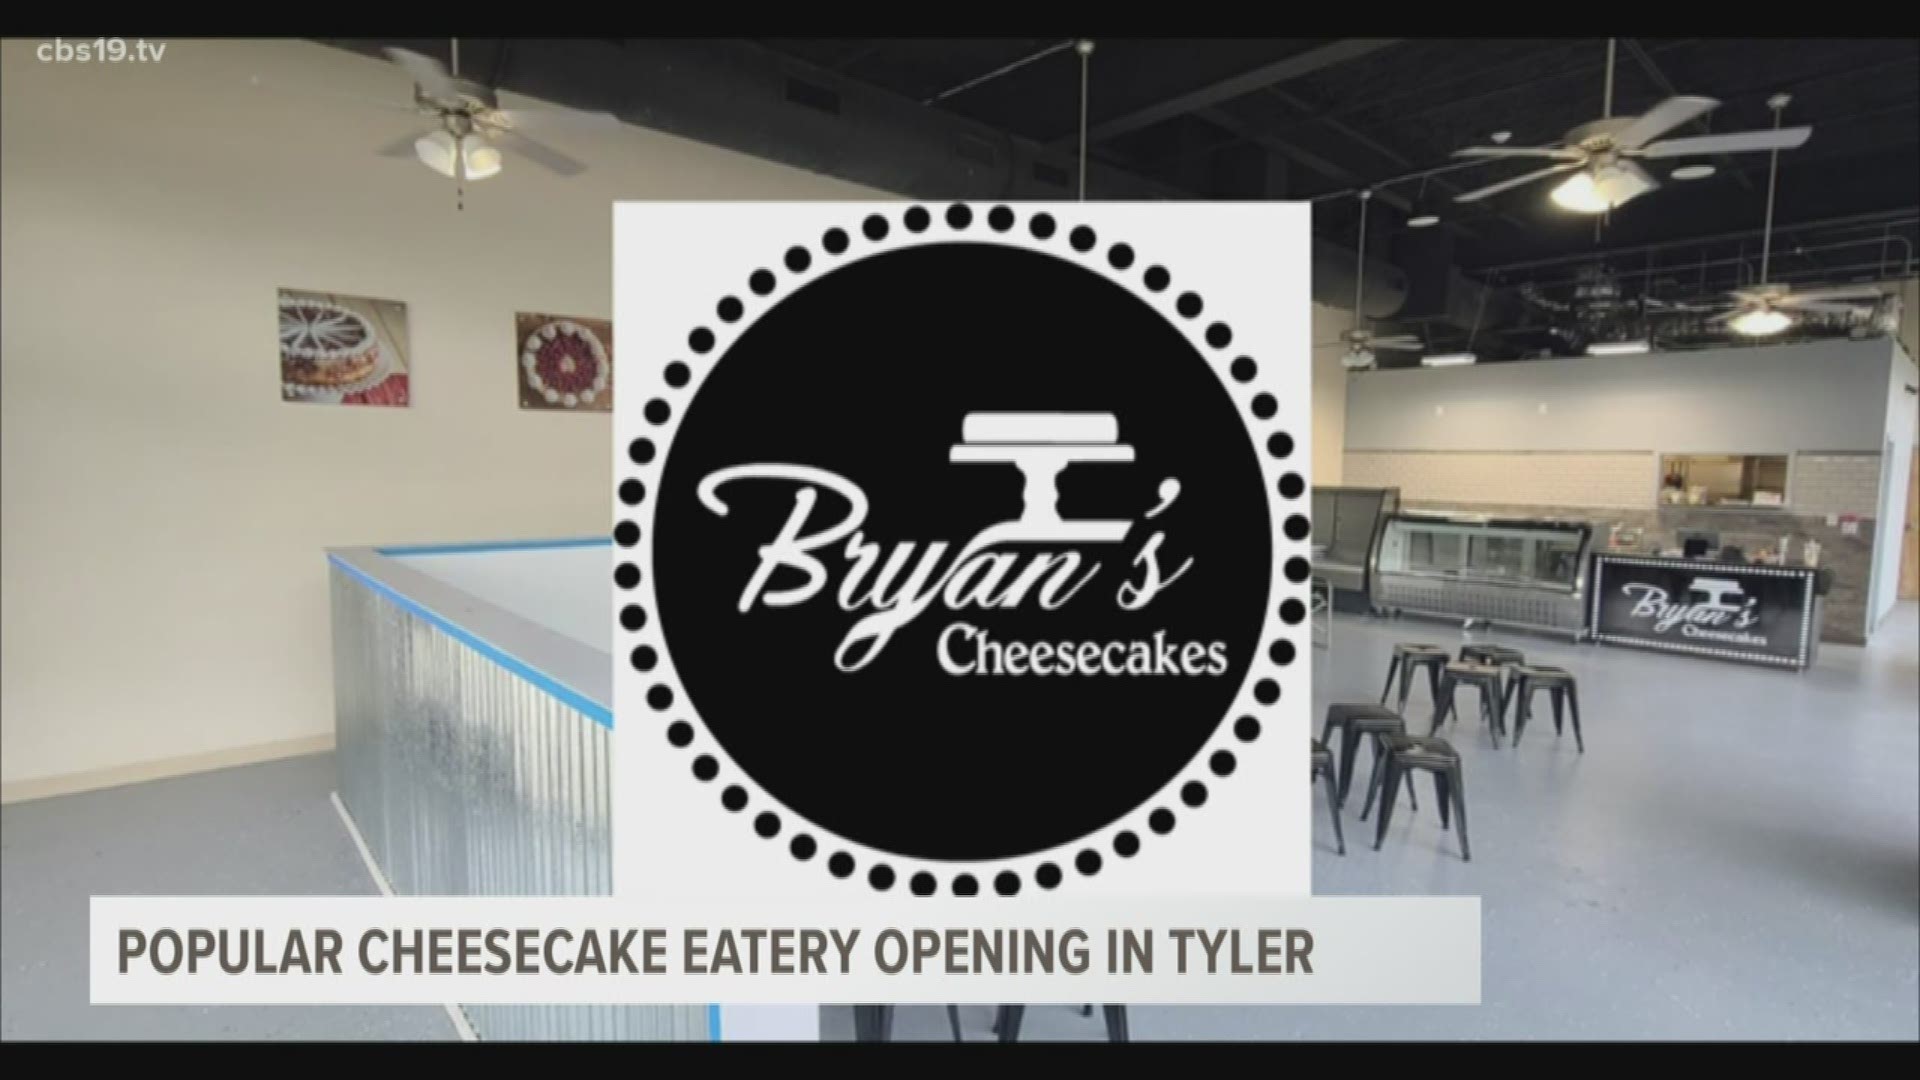 Bryan's Cheesecakes will open a new location on South Beckham Avenue.